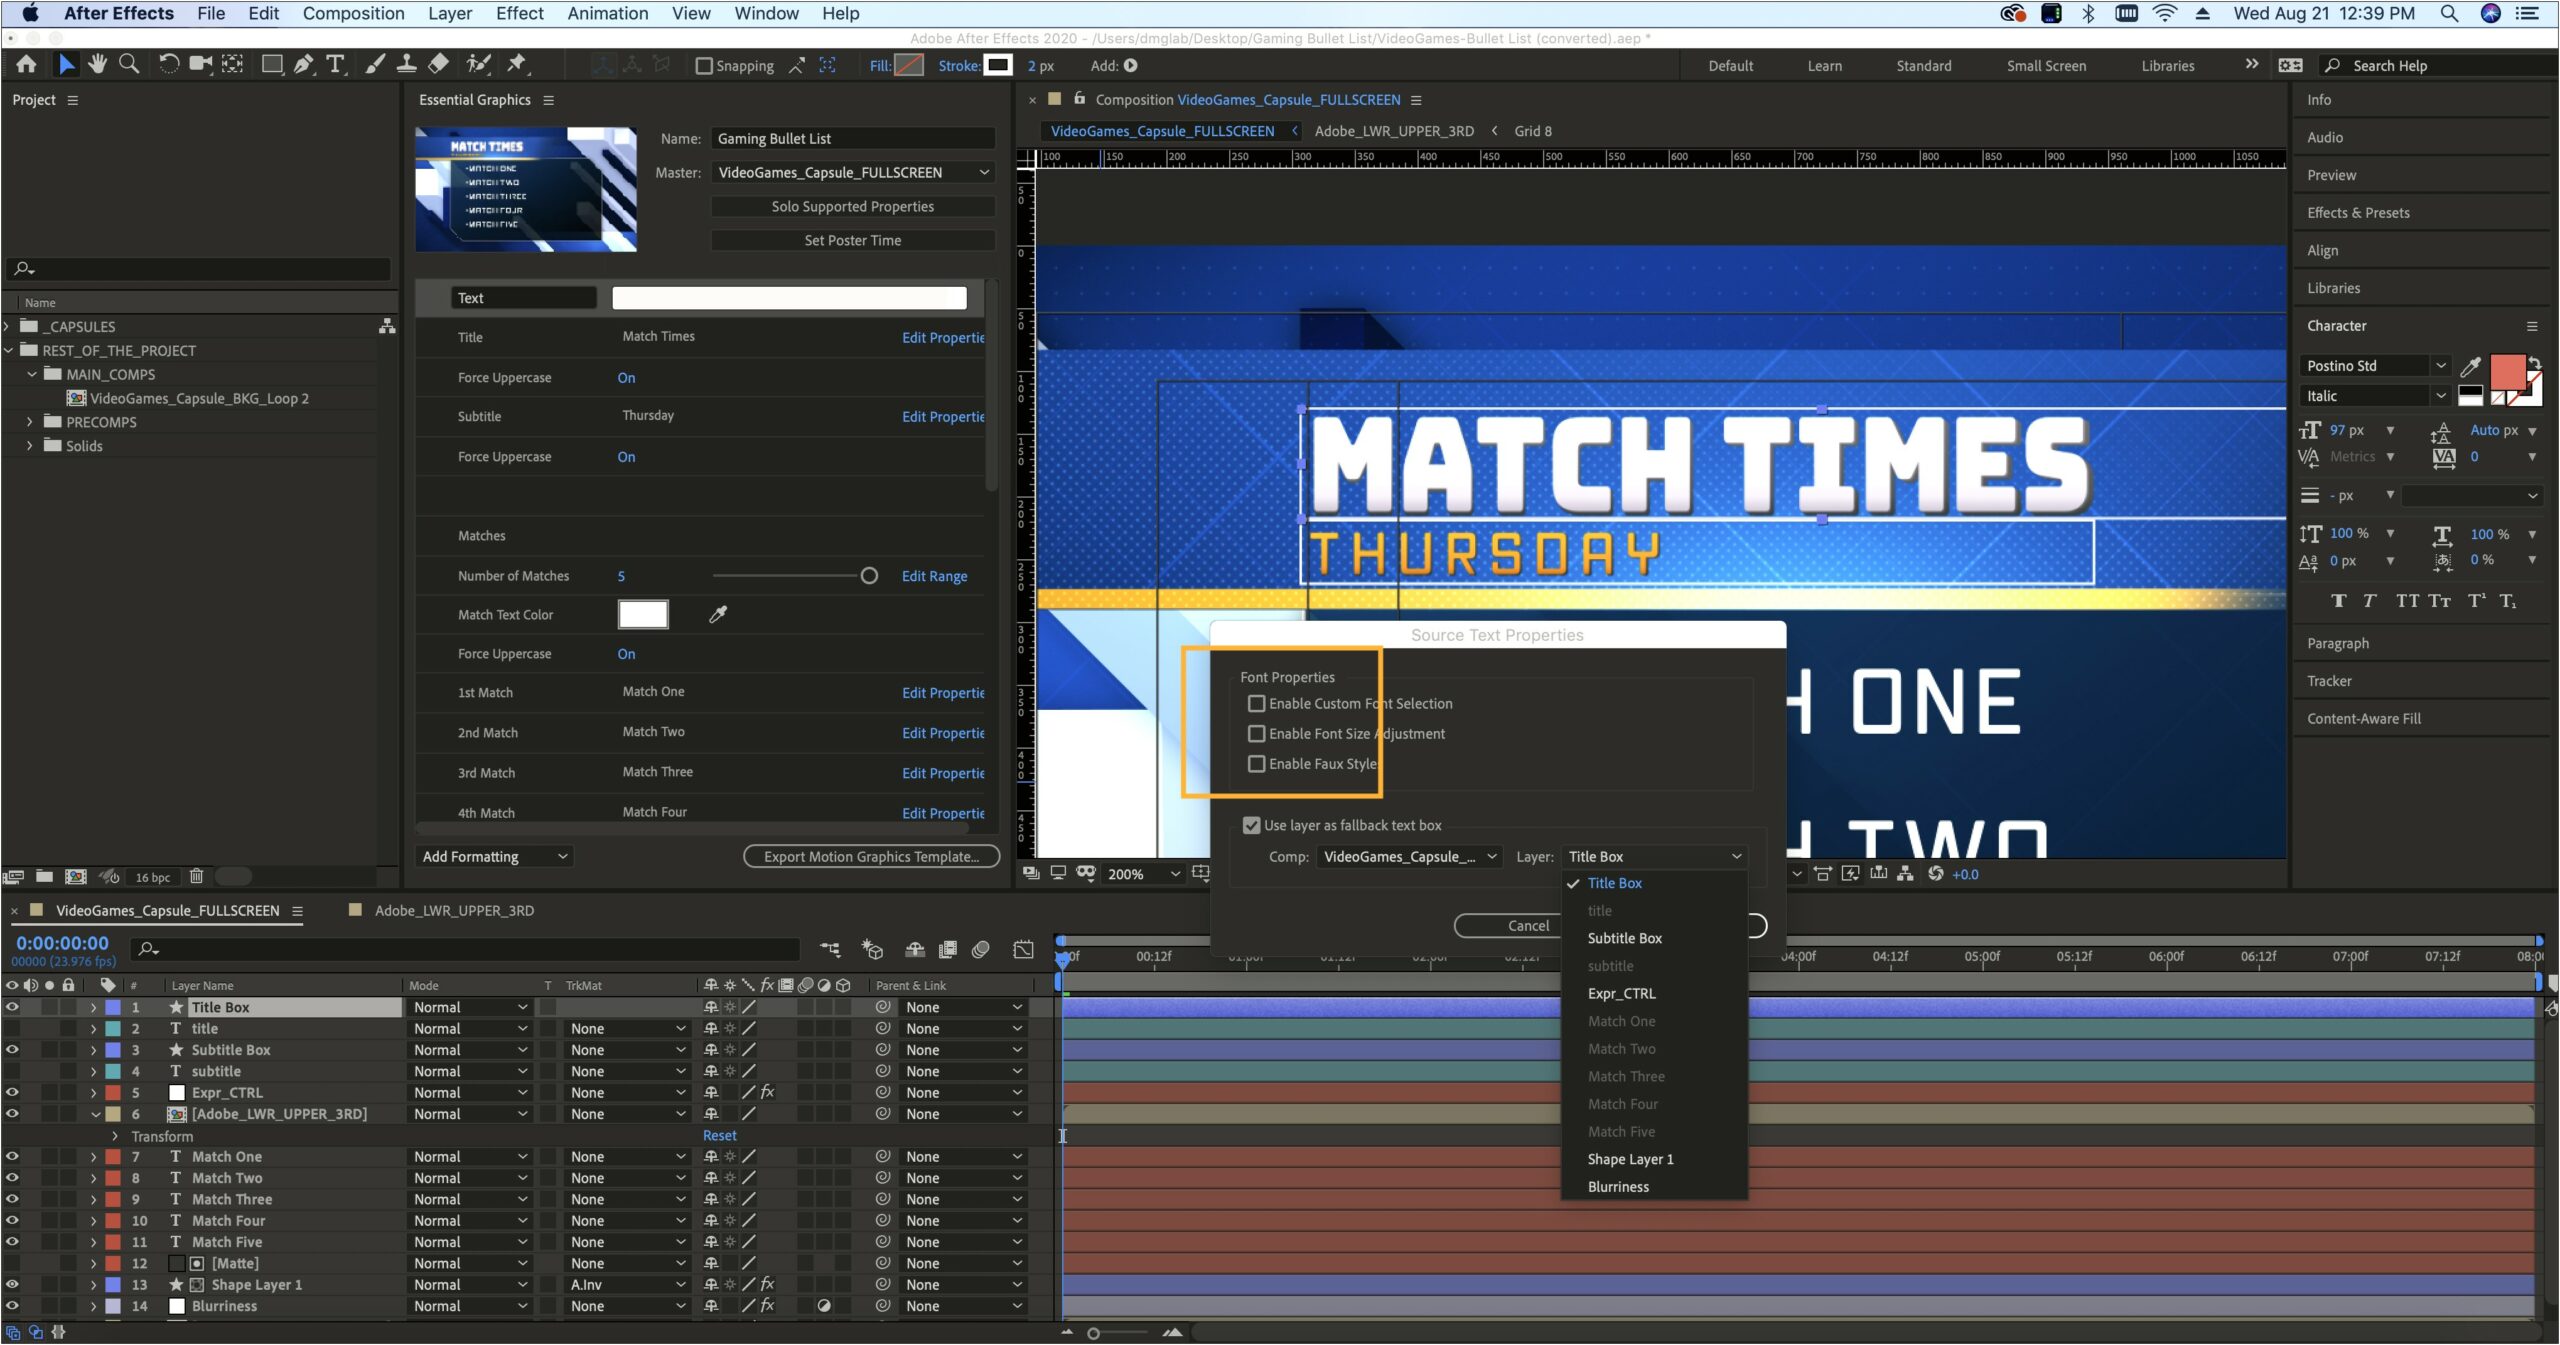 After Effects Templates Free Download Torrent